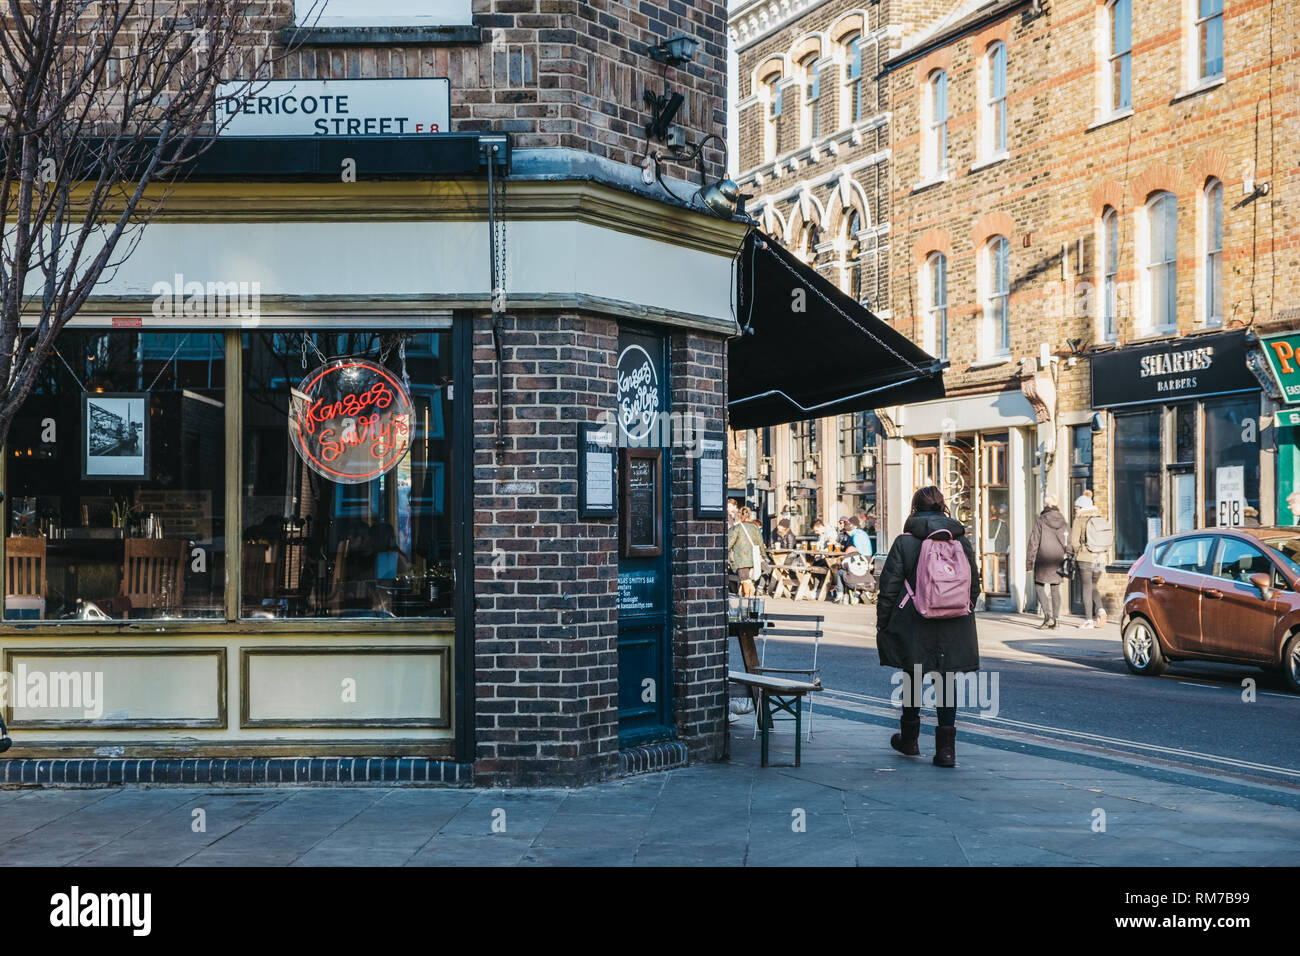 London, UK - February 03, 2019: People walking past shops and cafes on Broadway Market, a shopping street in the heart of Hackney, East London, UK. Stock Photo